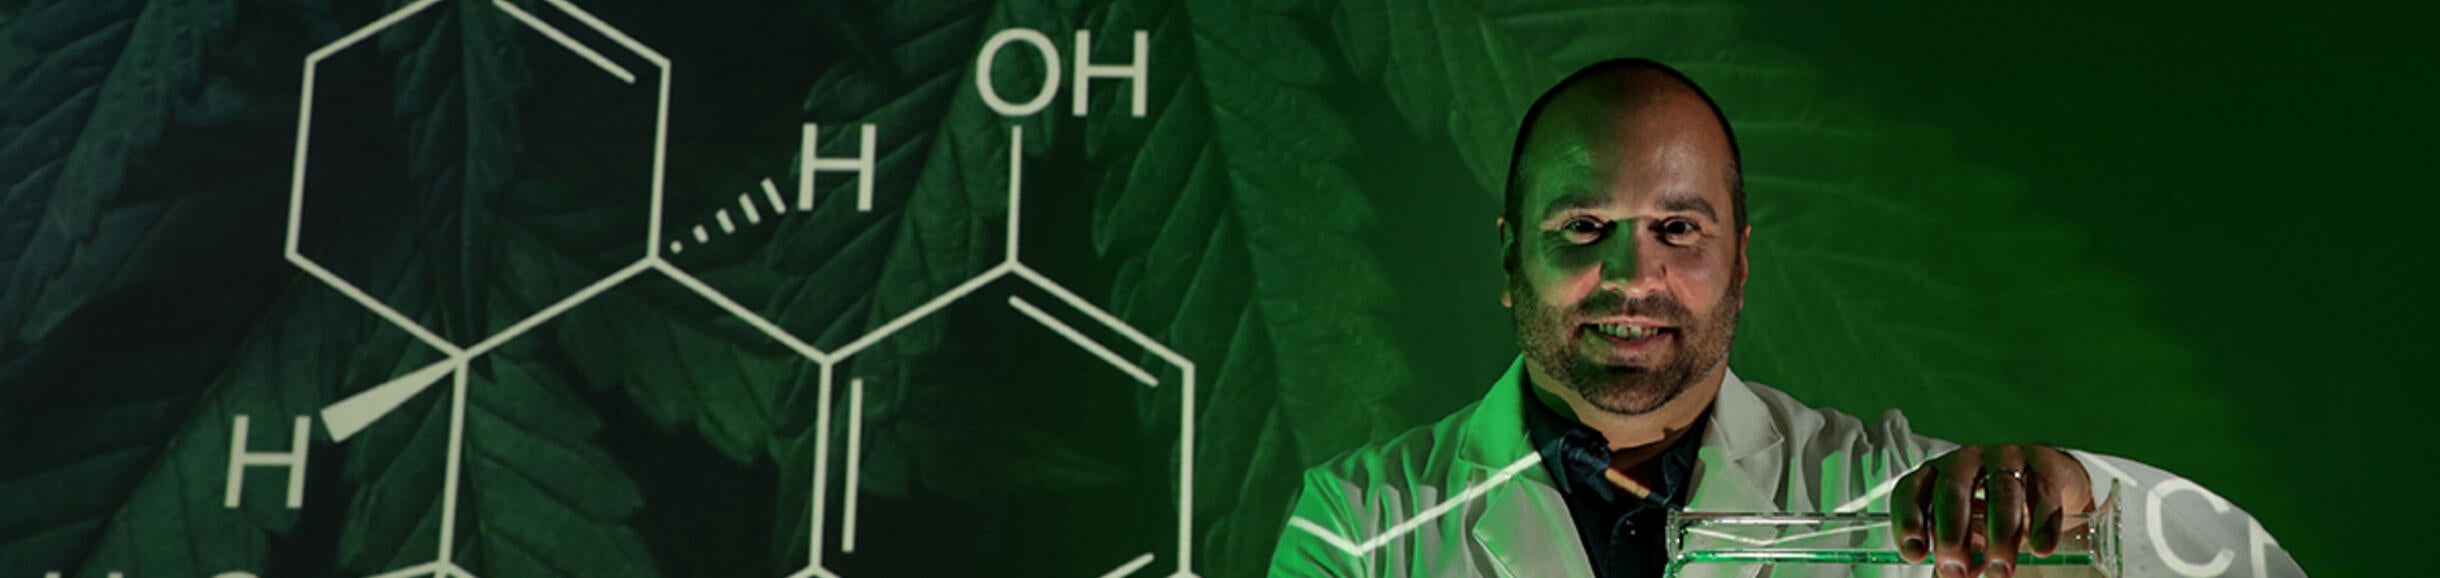 Nick Dipatrizio in front of the chemical symbol for cannabinoids